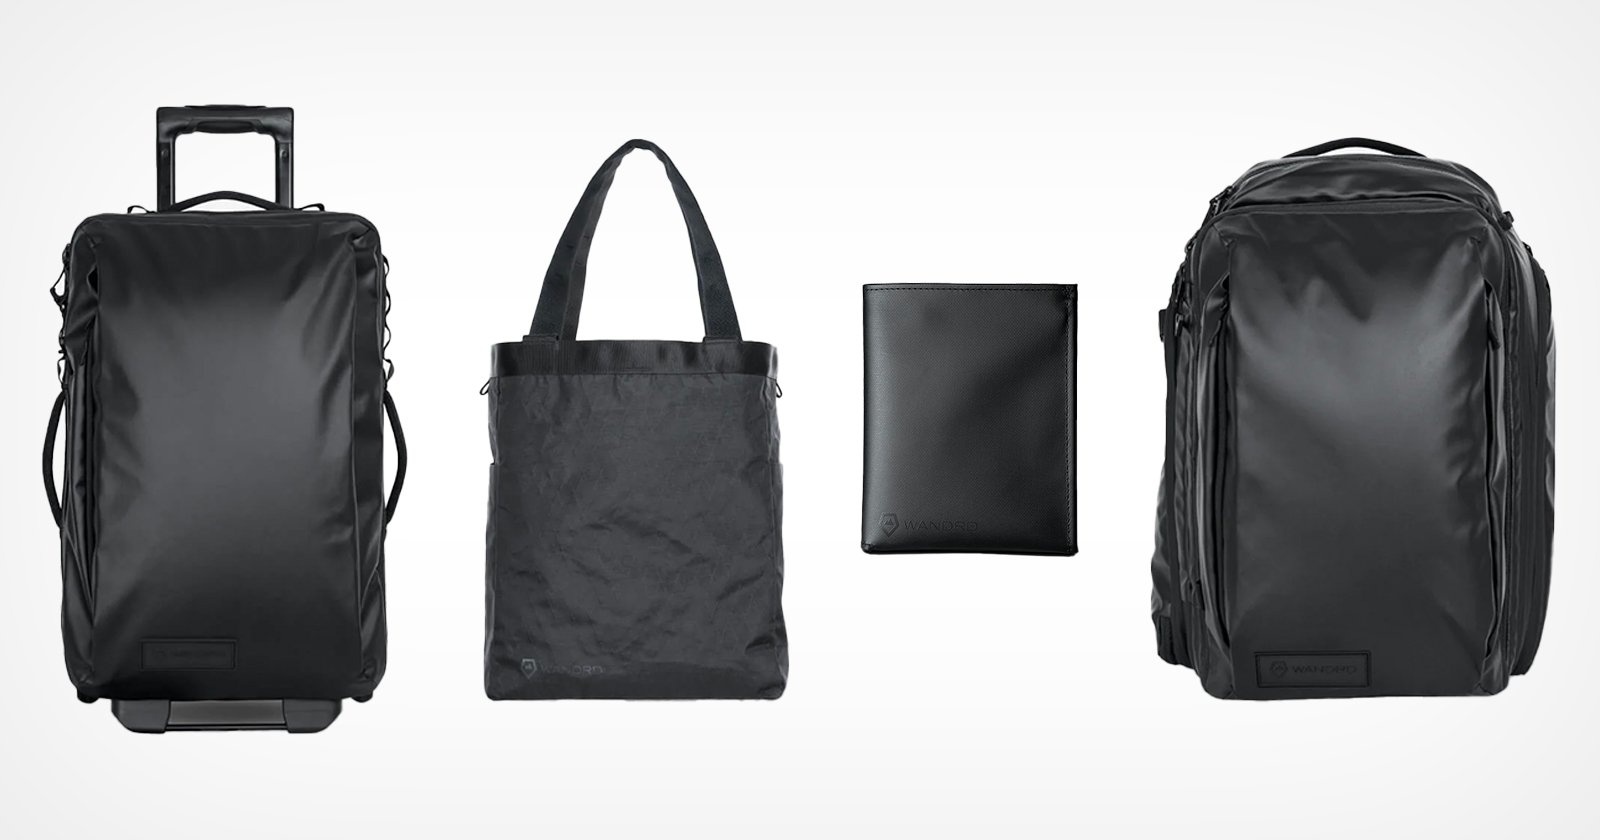 Wandrd Launches New Transit Travel Series Bags for Photographers | PetaPixel